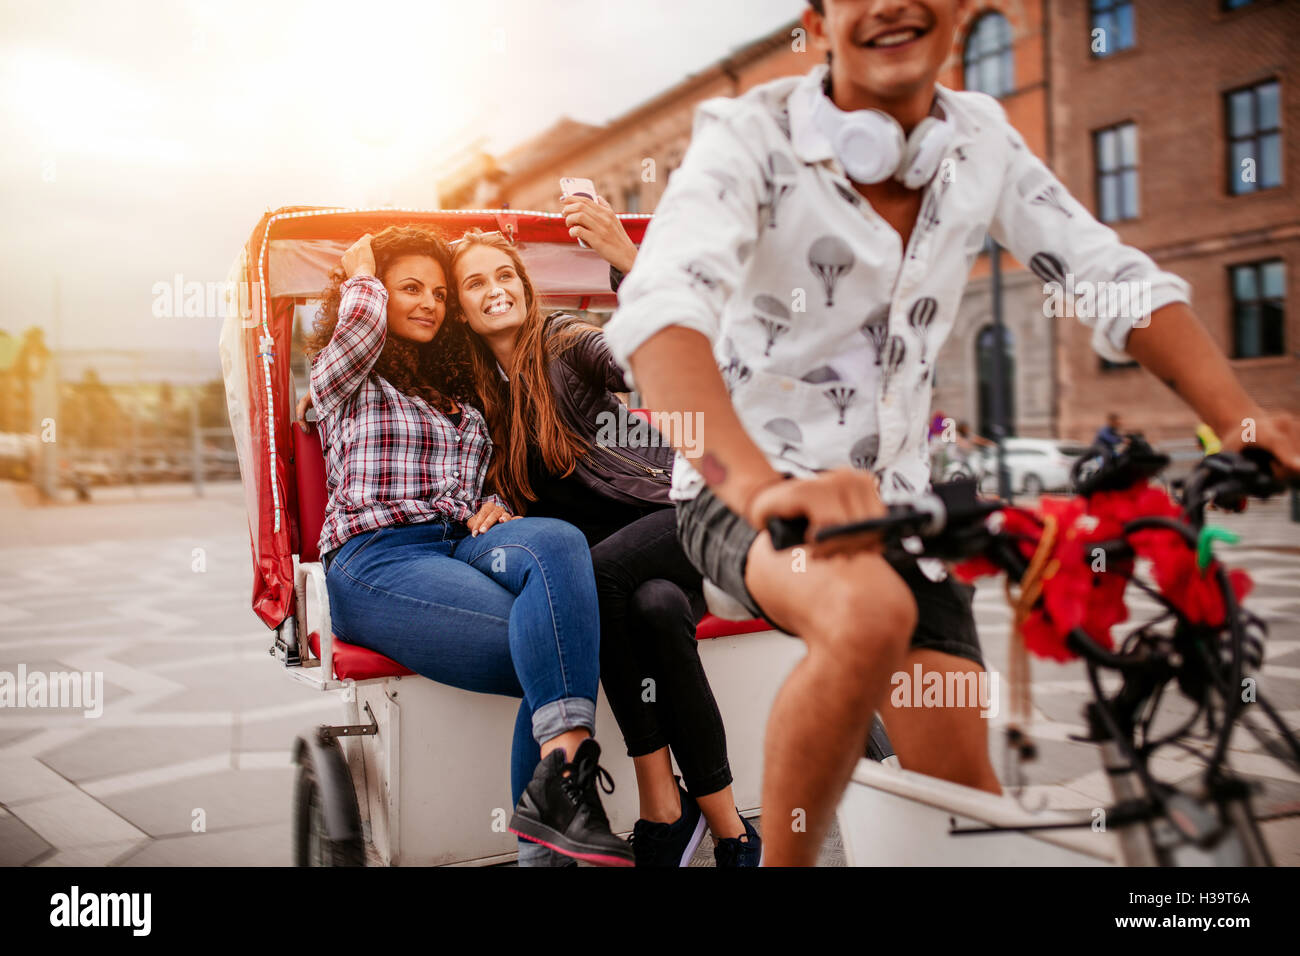 Shot of female friends taking selfie on tricycle. Young man riding tricycle bike with women sitting at back taking self portrait Stock Photo